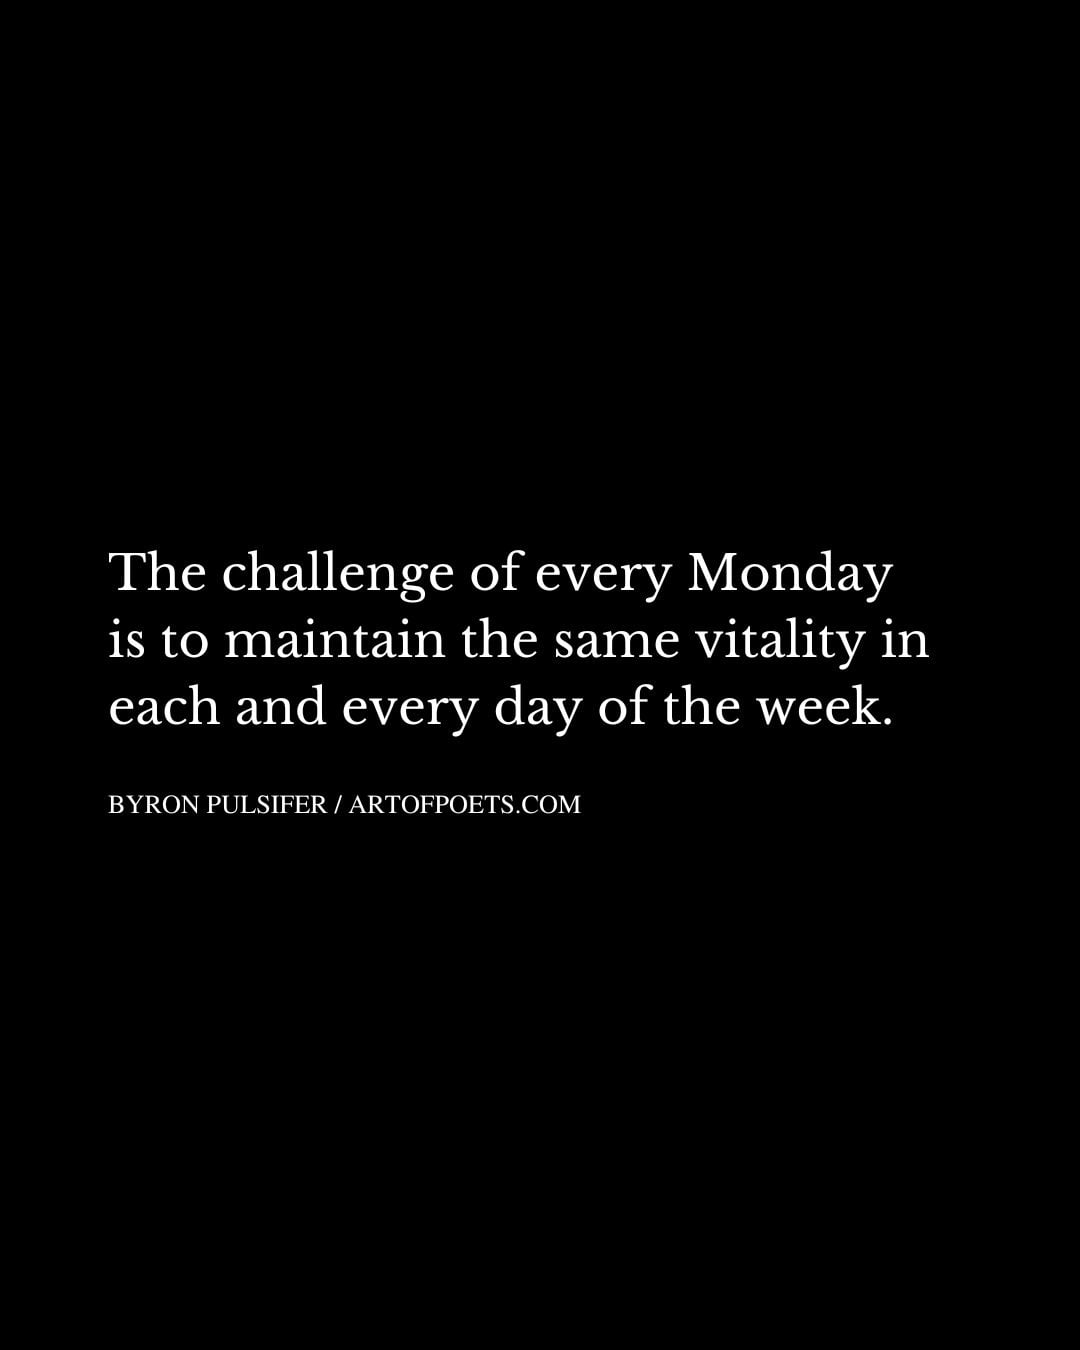 The challenge of every Monday is to maintain the same vitality in each and every day of the week